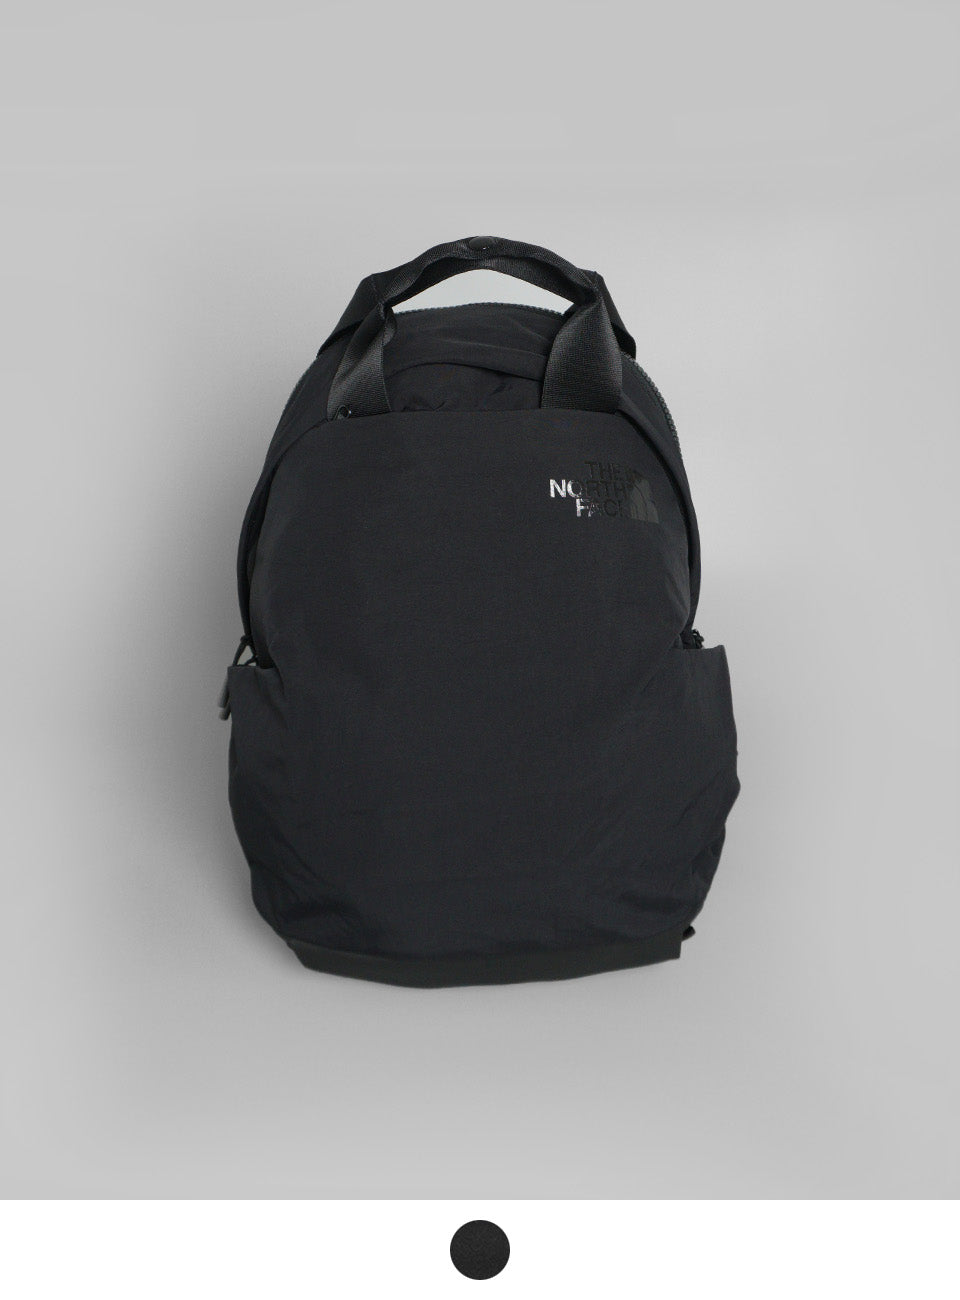 THE NORTH FACE ノースフェイス ネバーストップ デイパック W Never Stop Daypack 18L バックパック リュックサック NMW82350【送料無料】